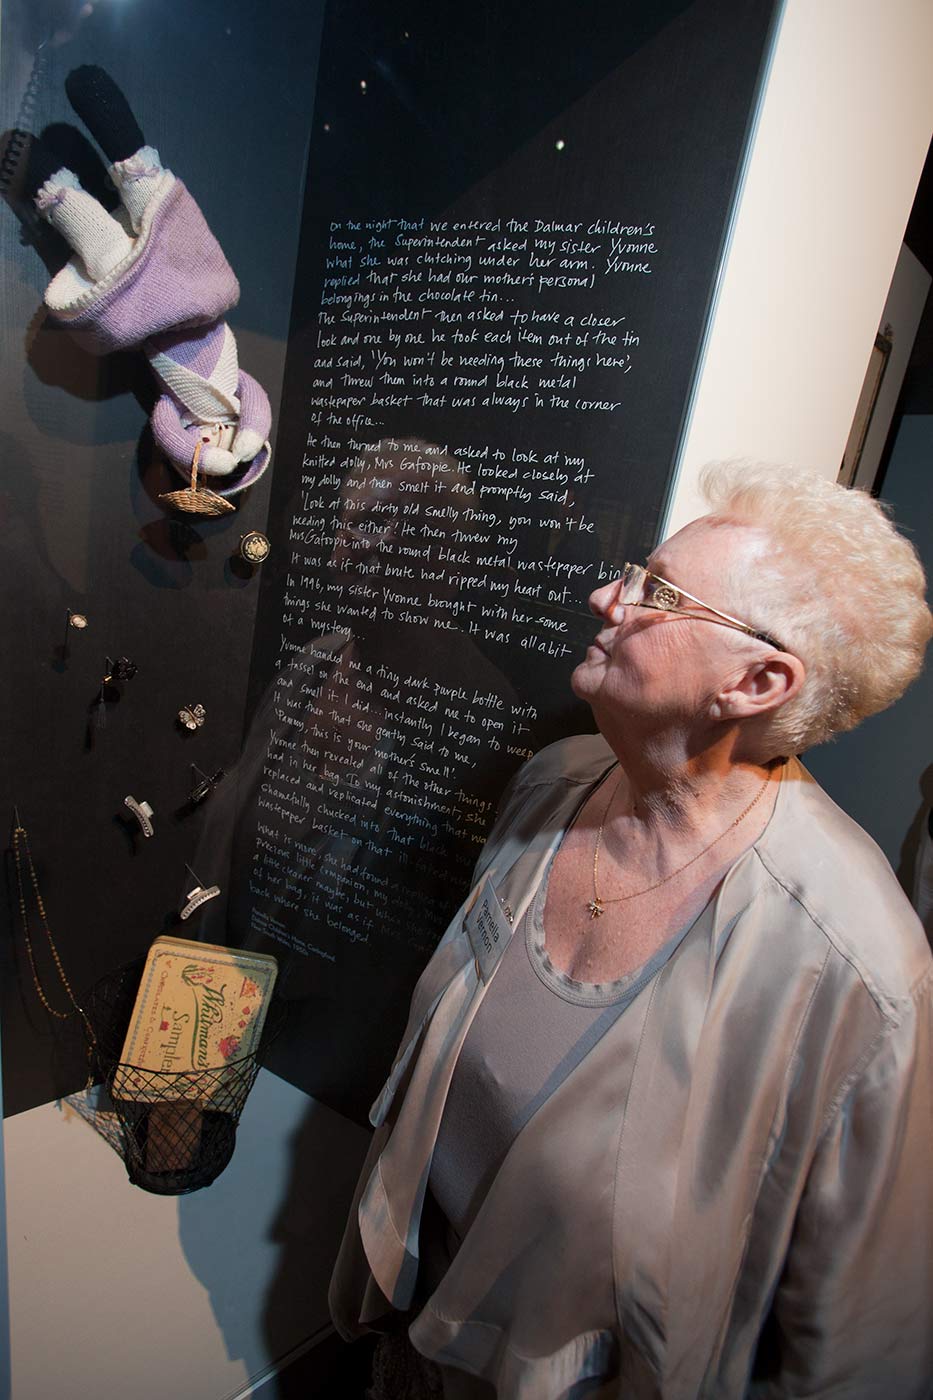 Colour photograph showing a woman standing, looking into an exhibition case. On the back wall of the case a small knitted doll tumbles down towards a metal wastepaper basket, which has a 'Whitman's Sampler' chocolate tin inside. Small hair clips and a pair of rosary beads are mounted between the doll and the bin. White handwritten text on a dark background is visible at the left of the case. - click to view larger image